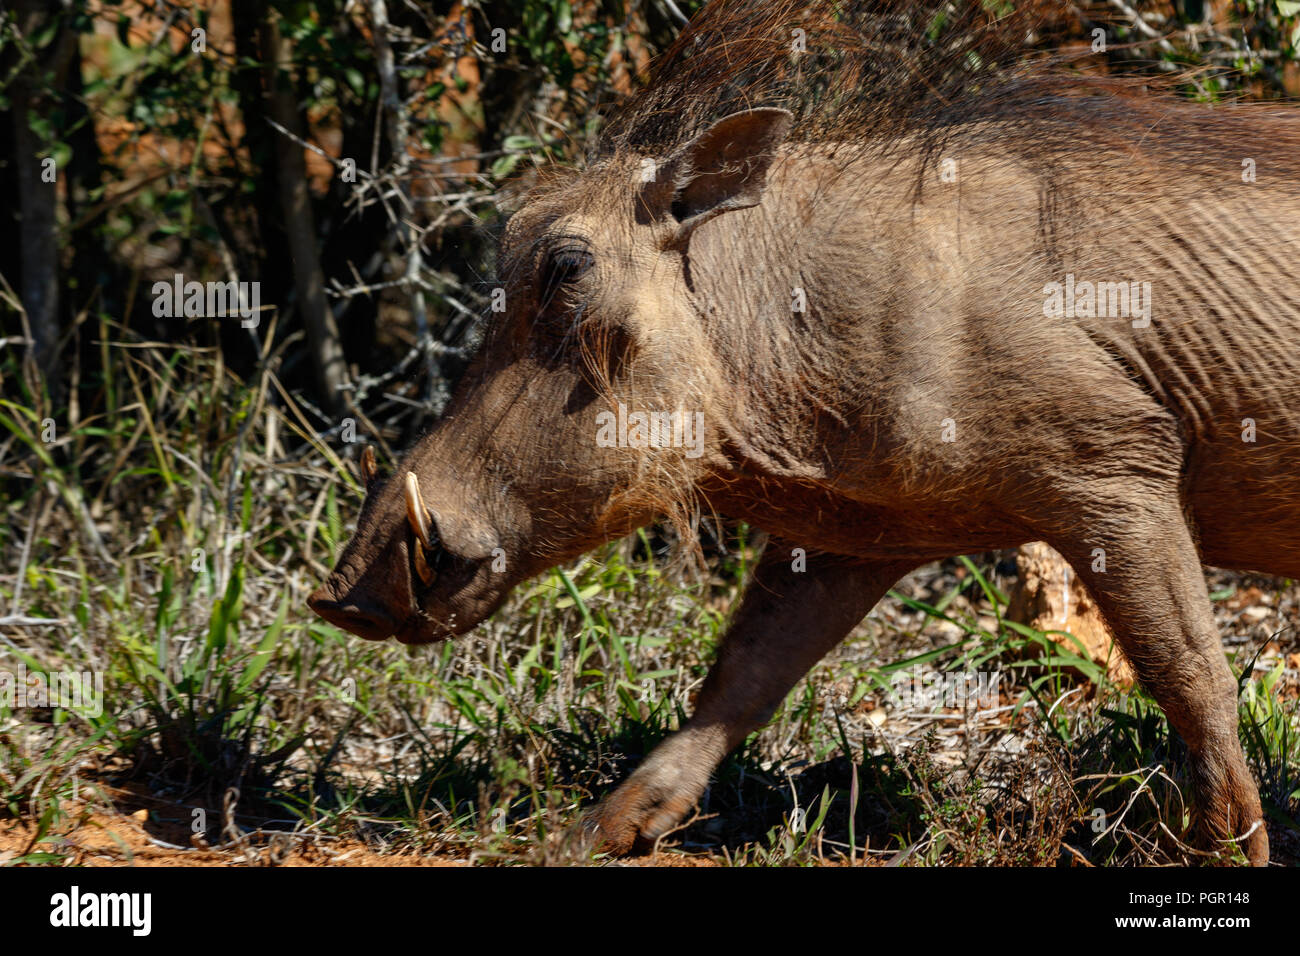 Running warthog between the grass in the field Stock Photo